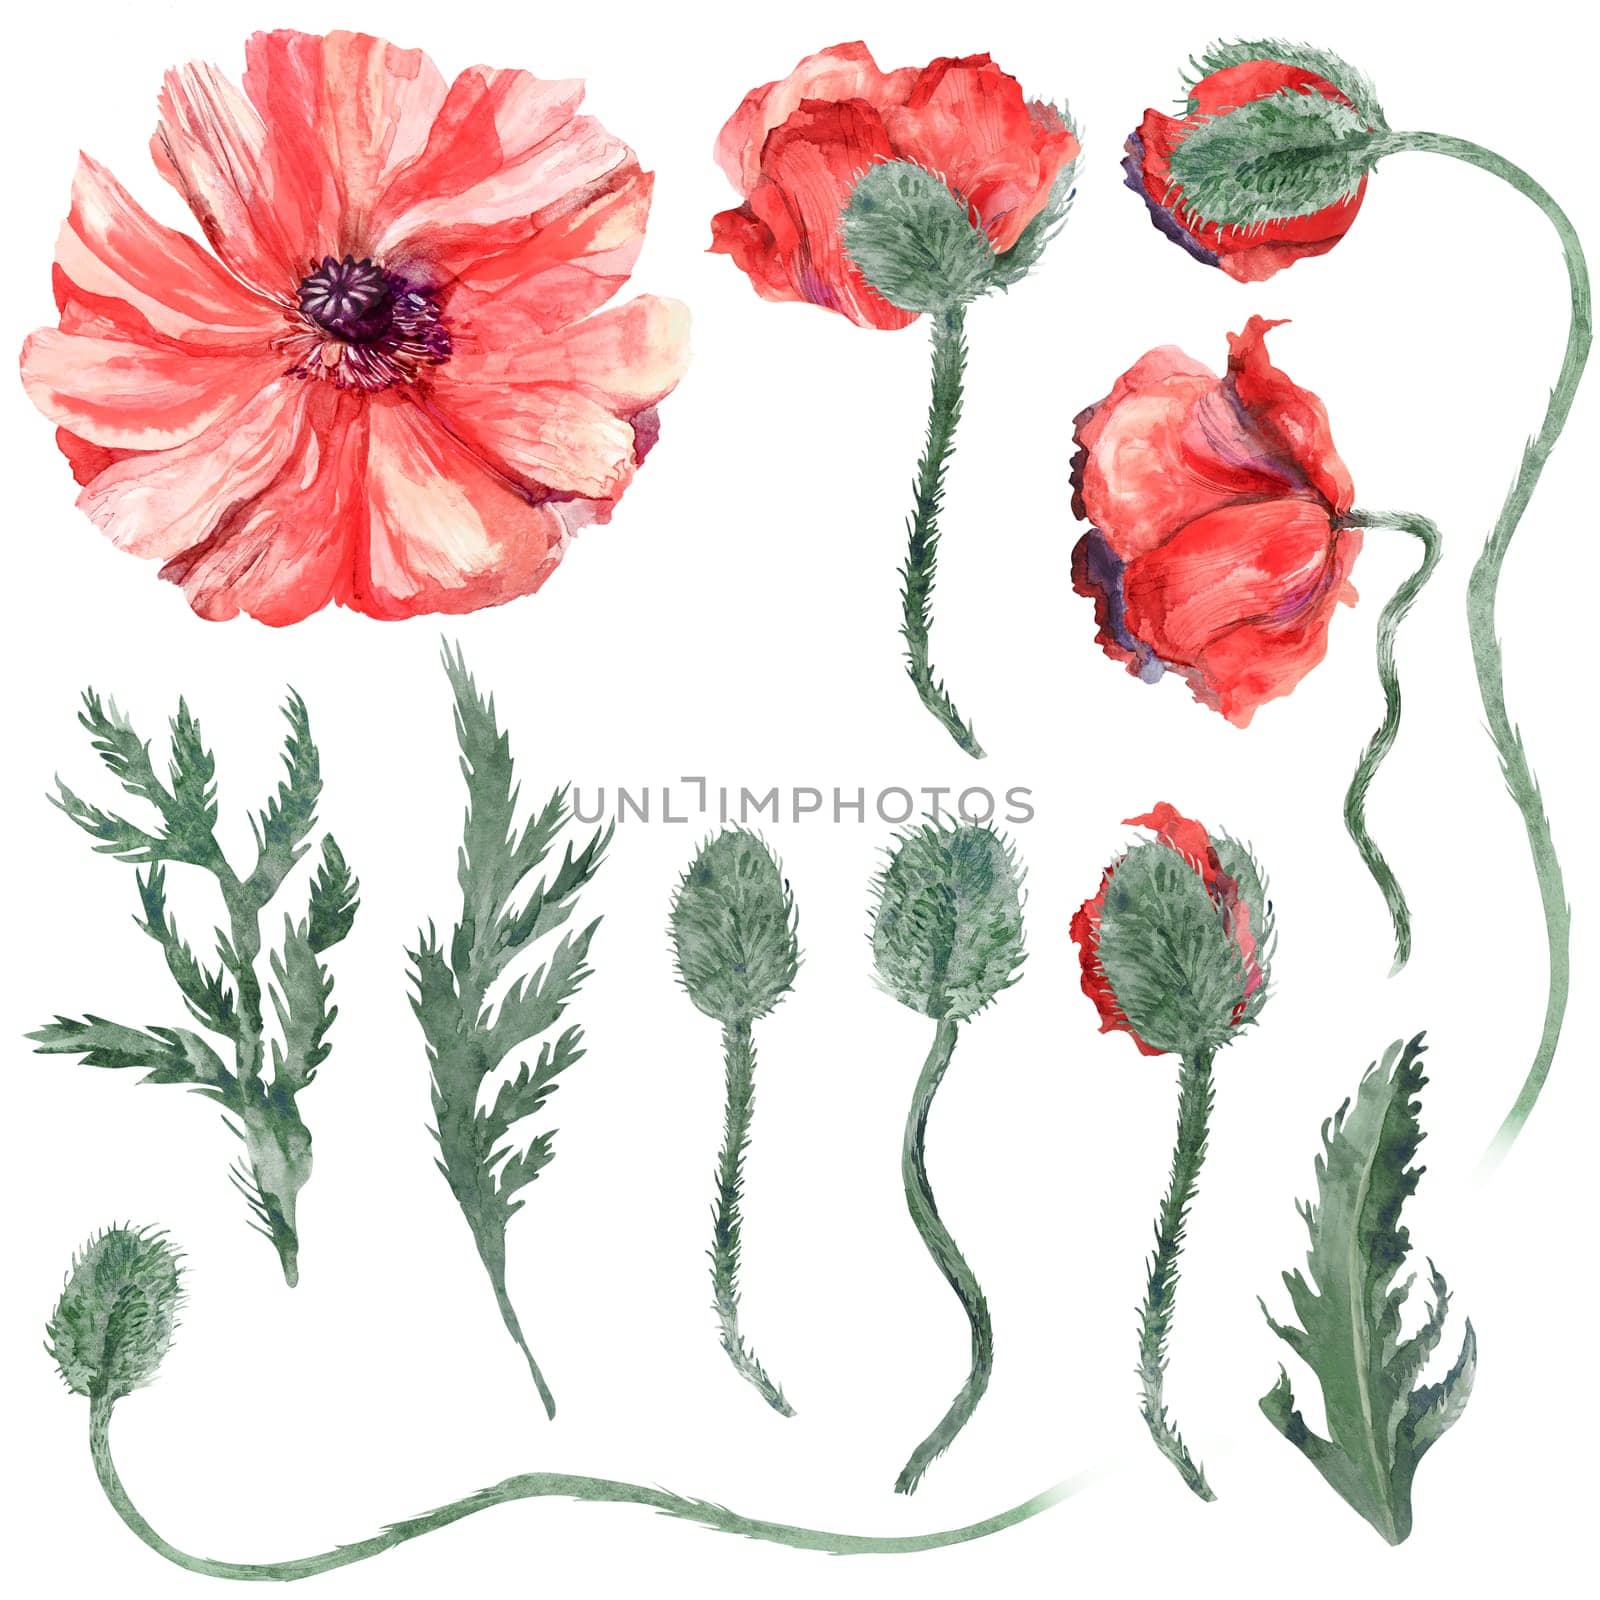 Vintage Set of watercolor red poppies with drop buds and leaves separately isolated on white background